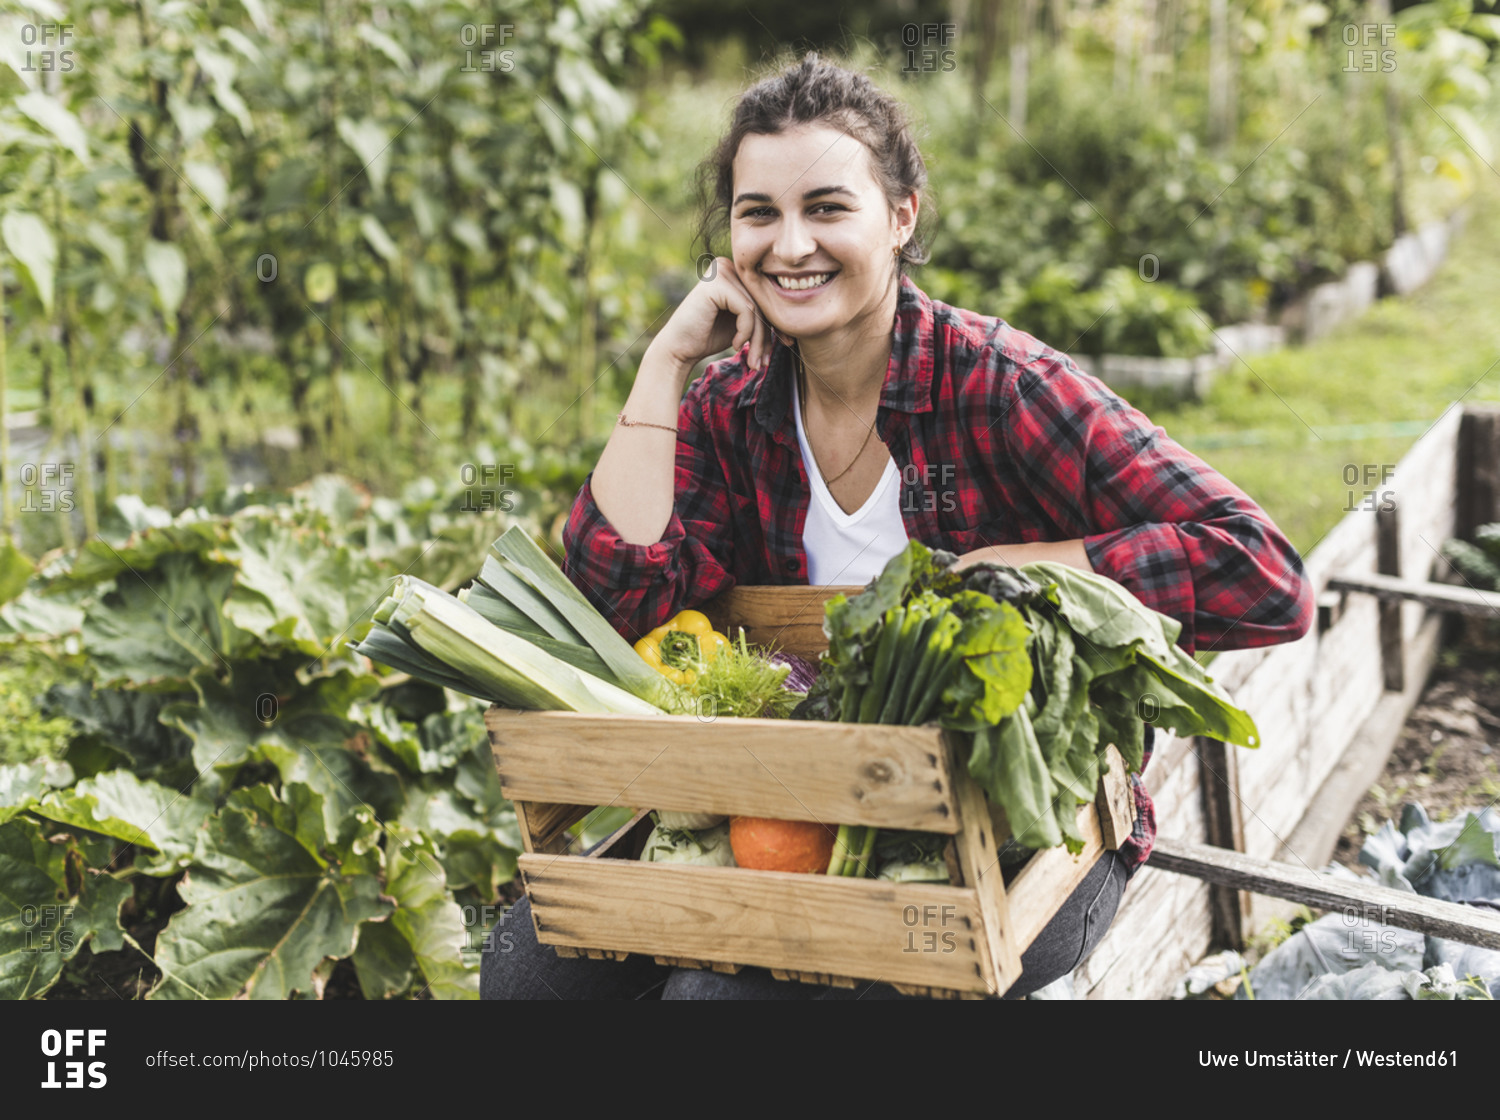 Smiling young woman sitting with vegetables in wooden crate at community garden